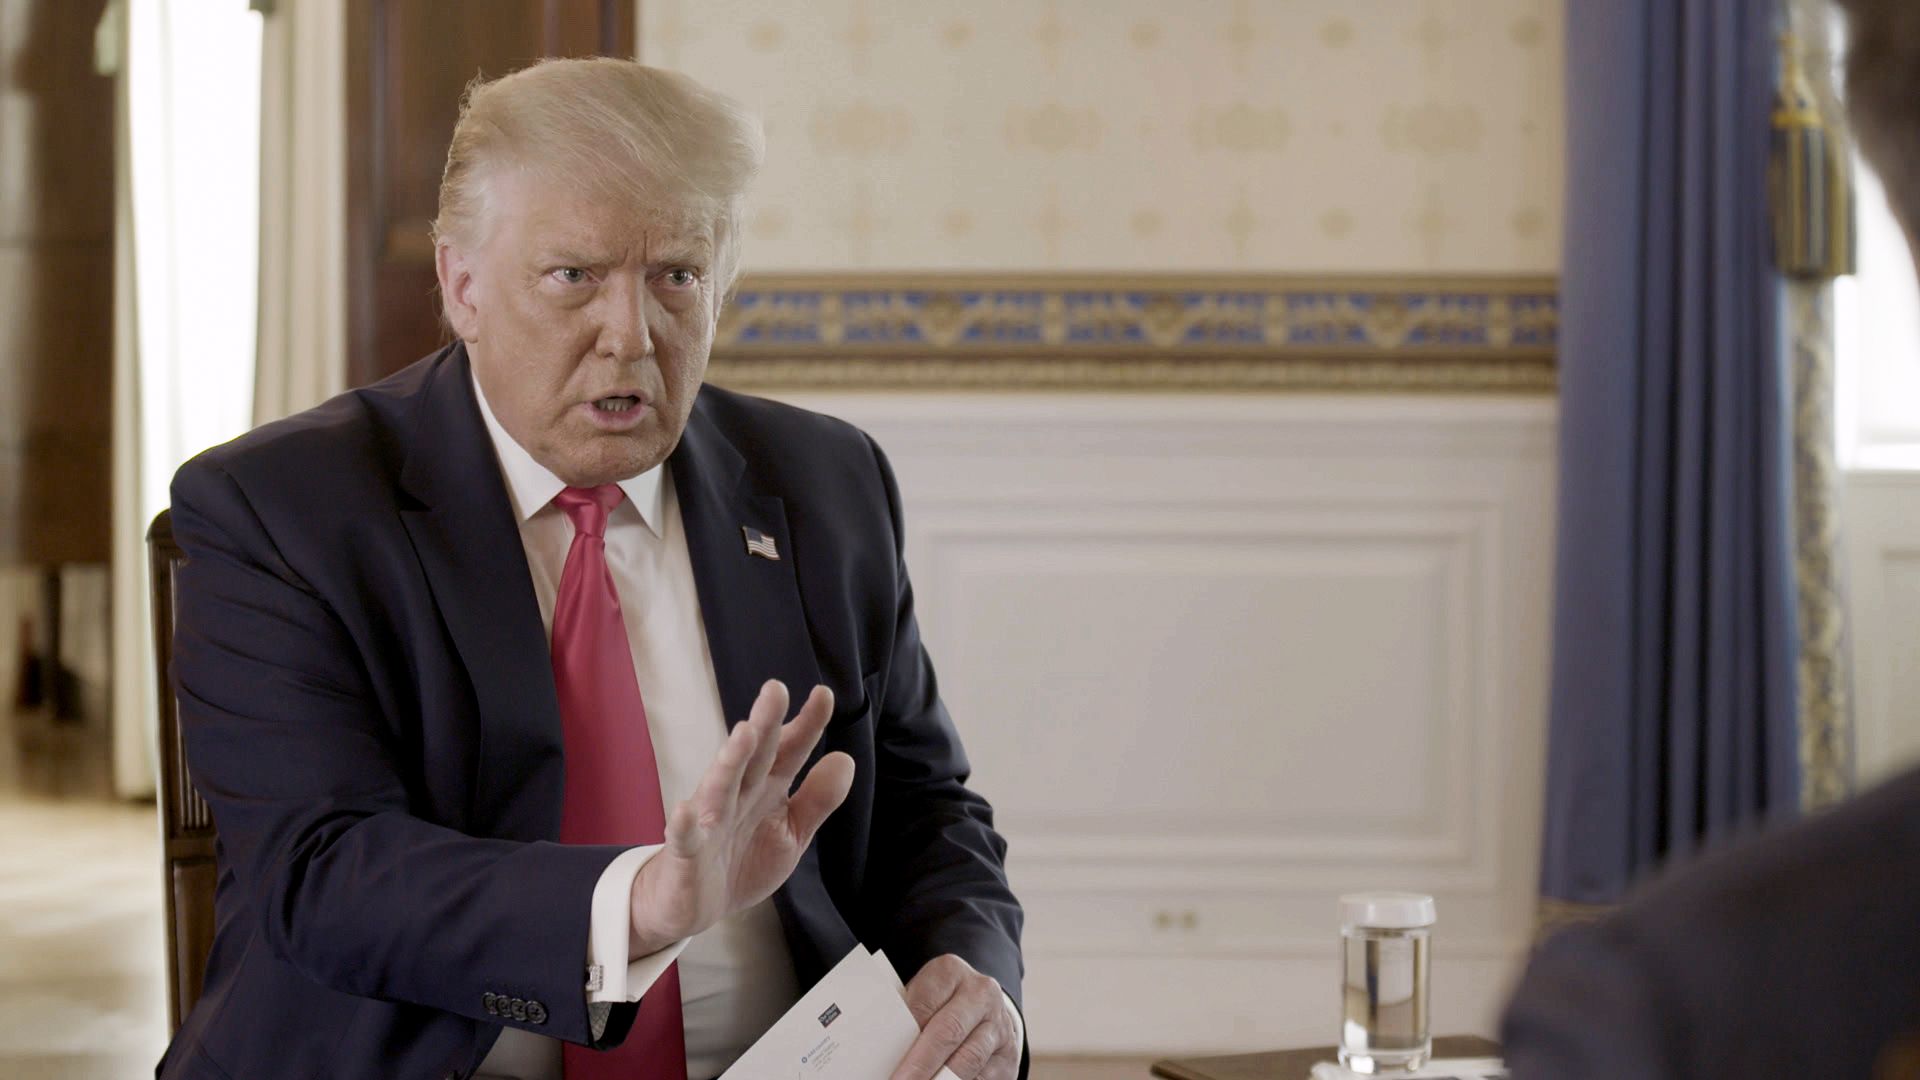 President Trump gestures as he talks during an Axios on HBO interview